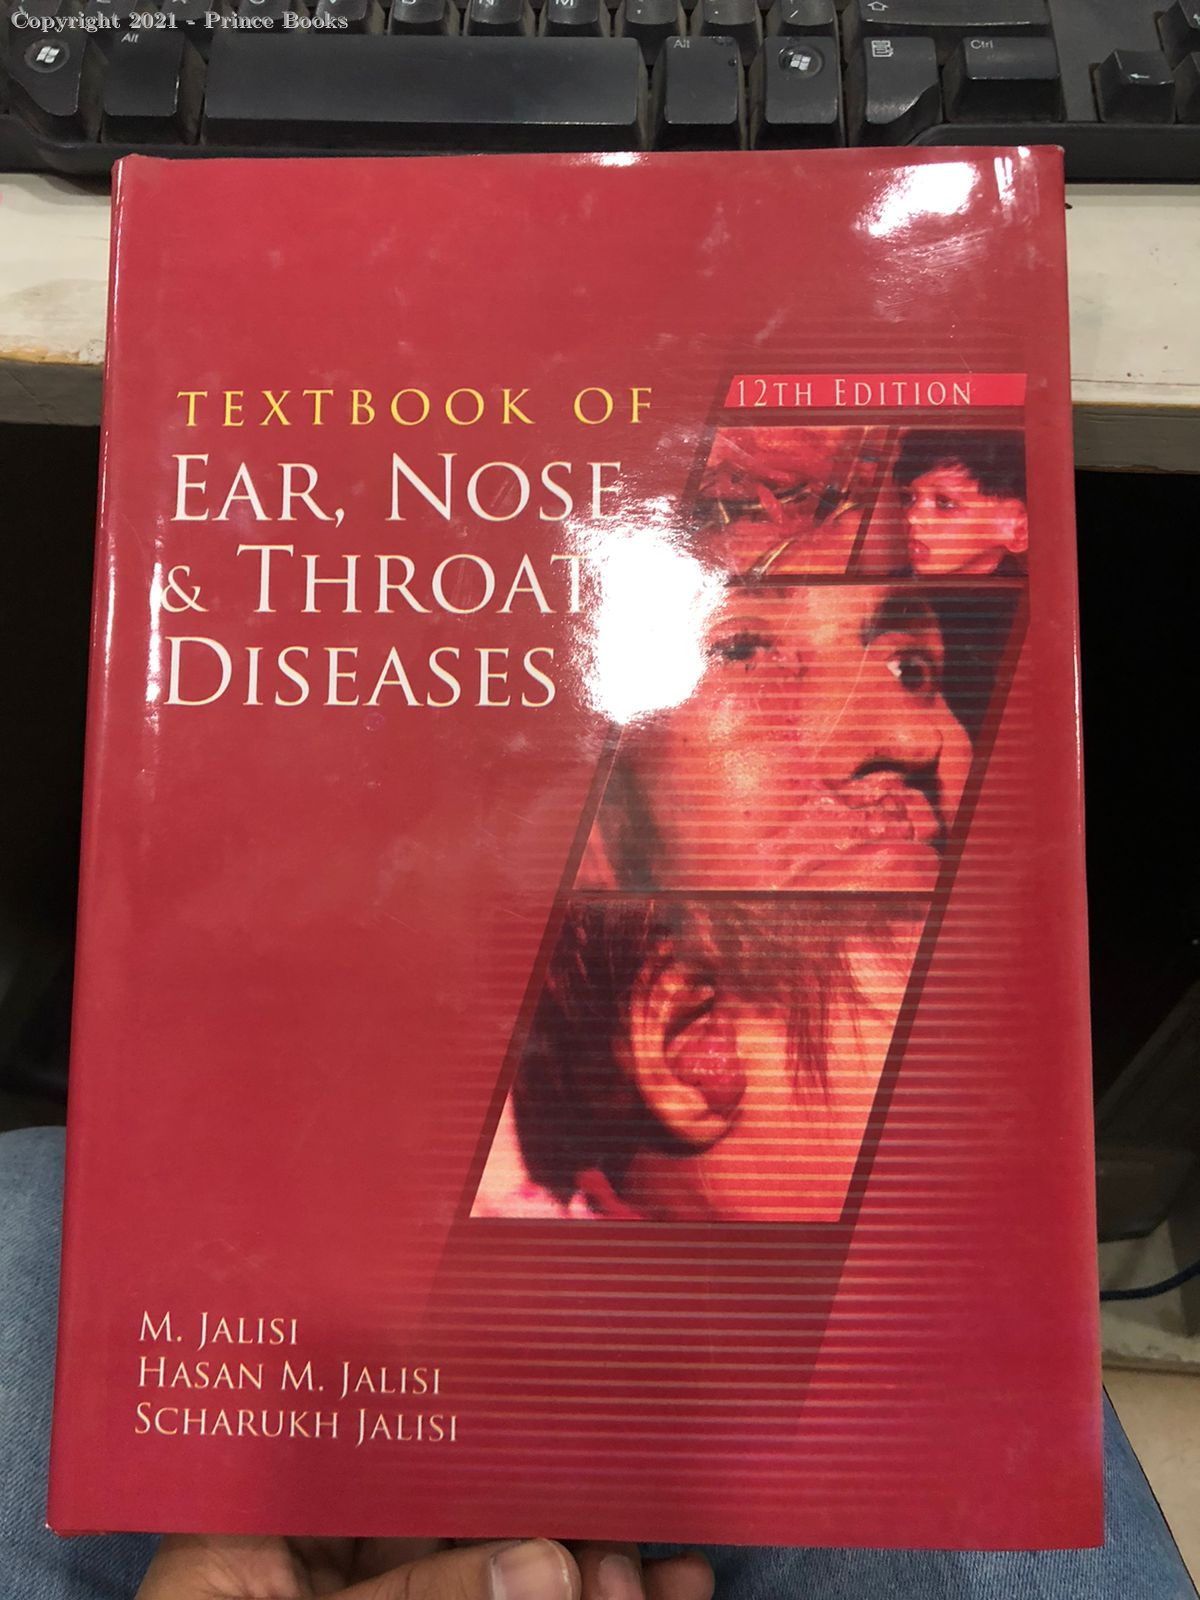 Textbook of Ear, Nose and Throat Diseases, 11e